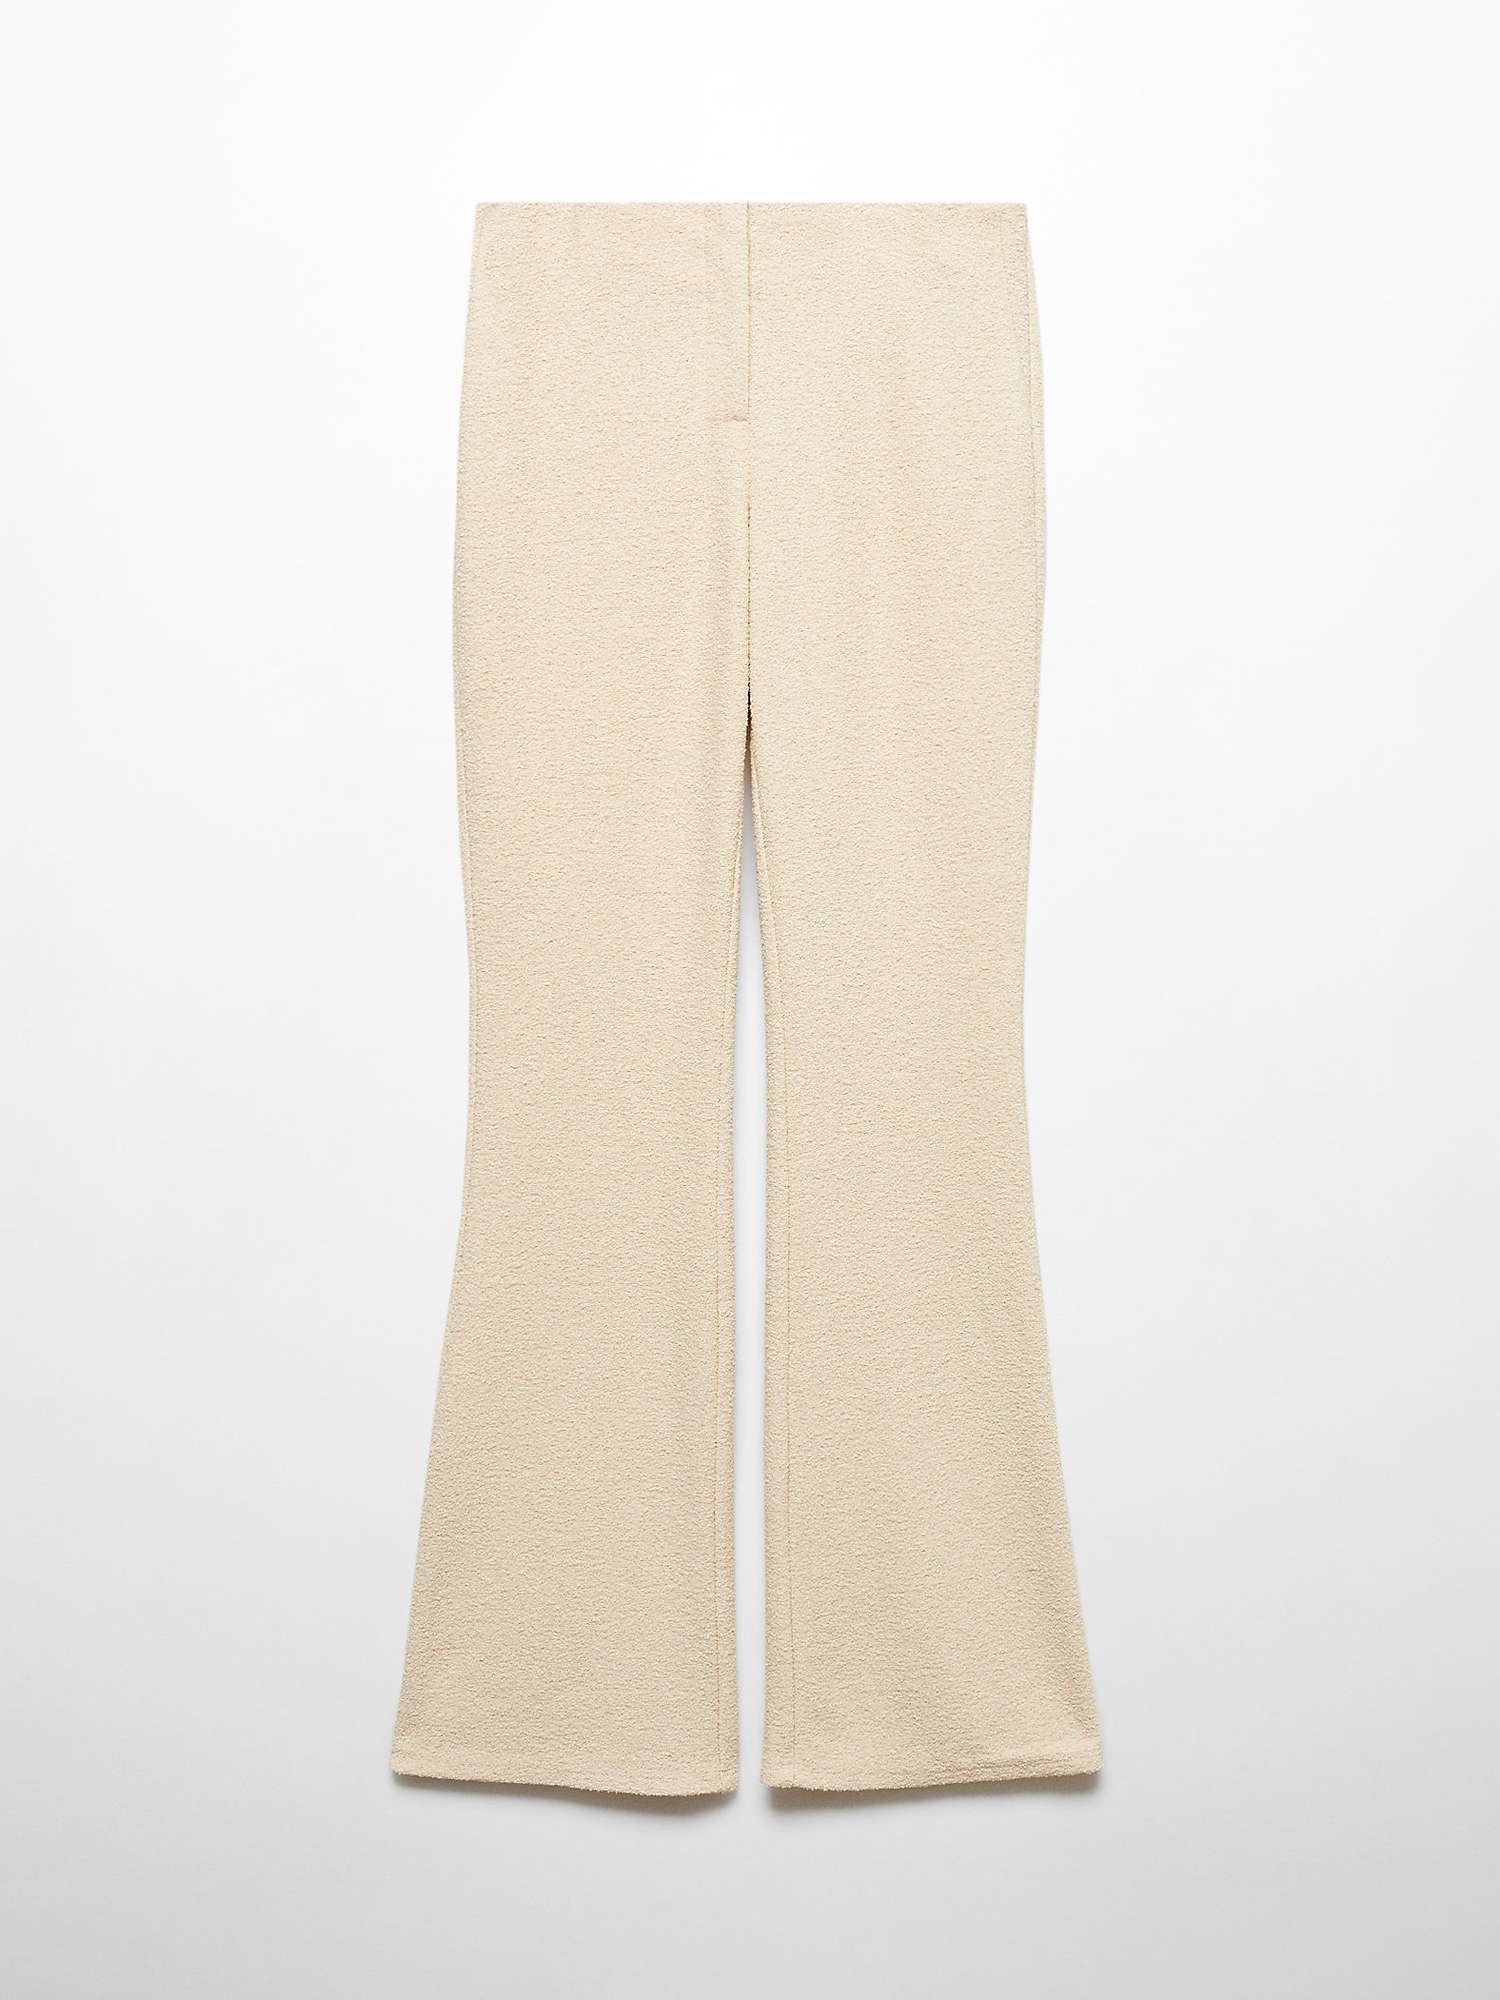 Mango Demi Flared Knitted Trousers, Natural White at John Lewis & Partners